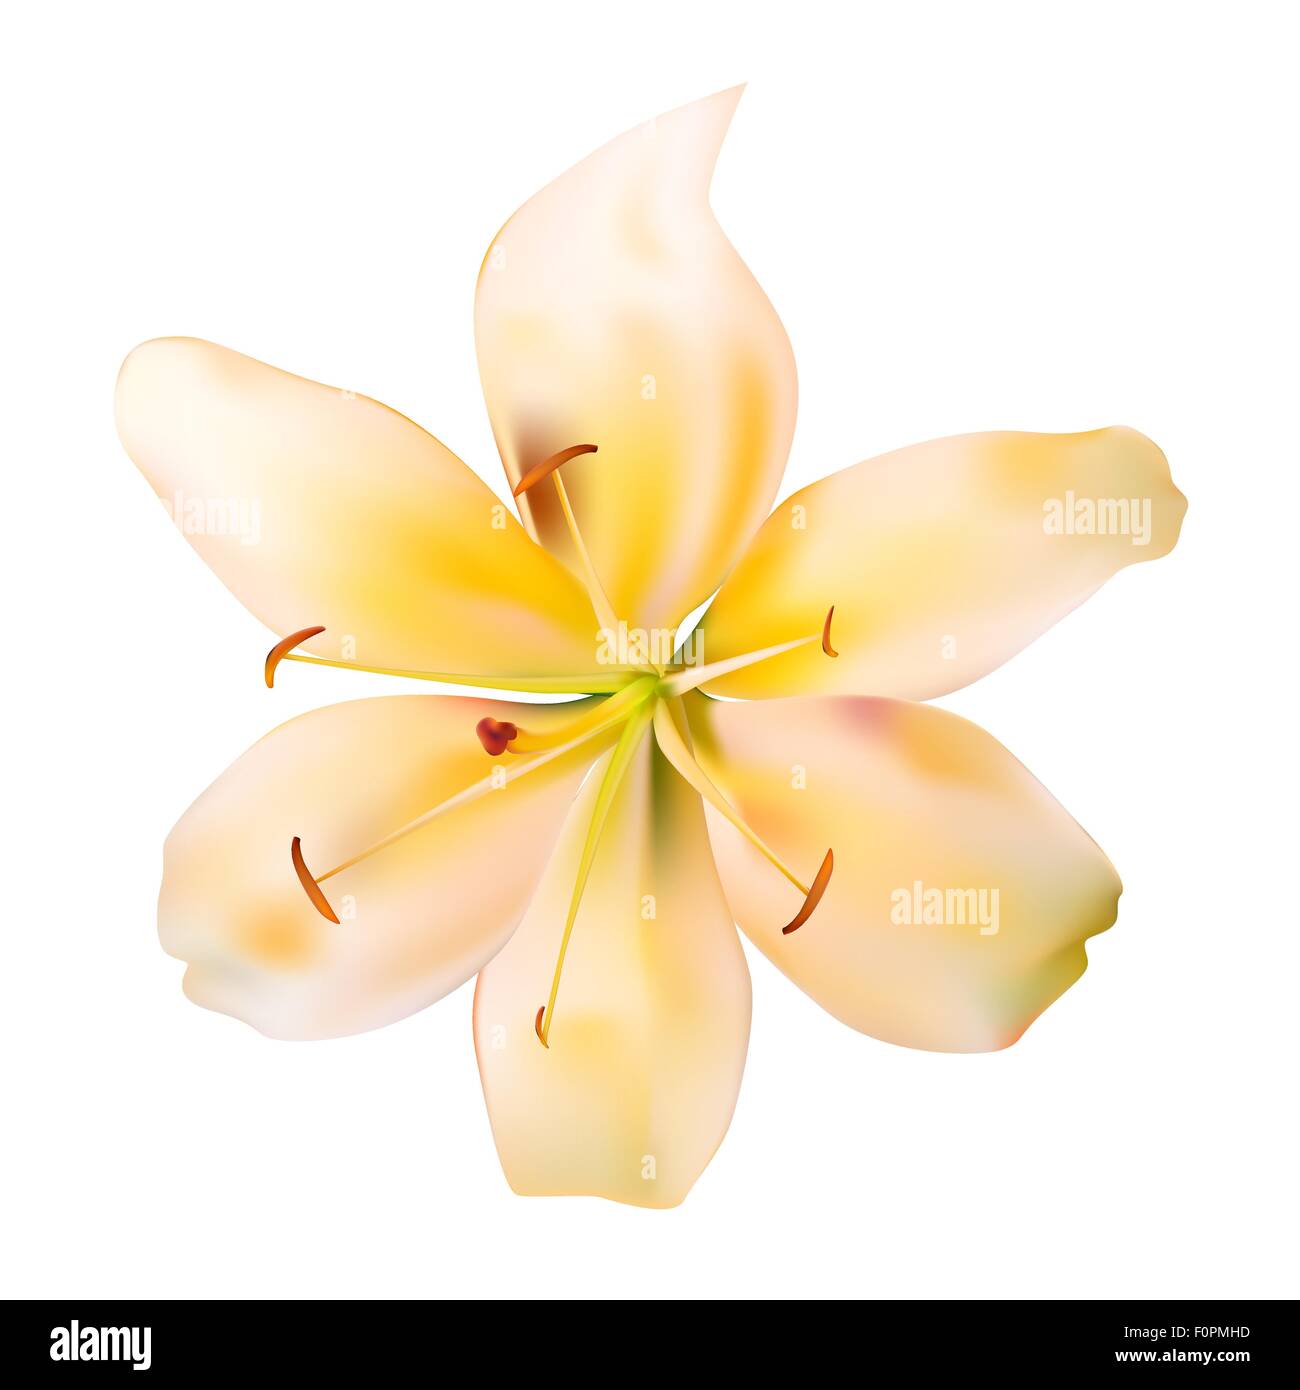 Tiger lily illustration Stock Vector Images - Alamy